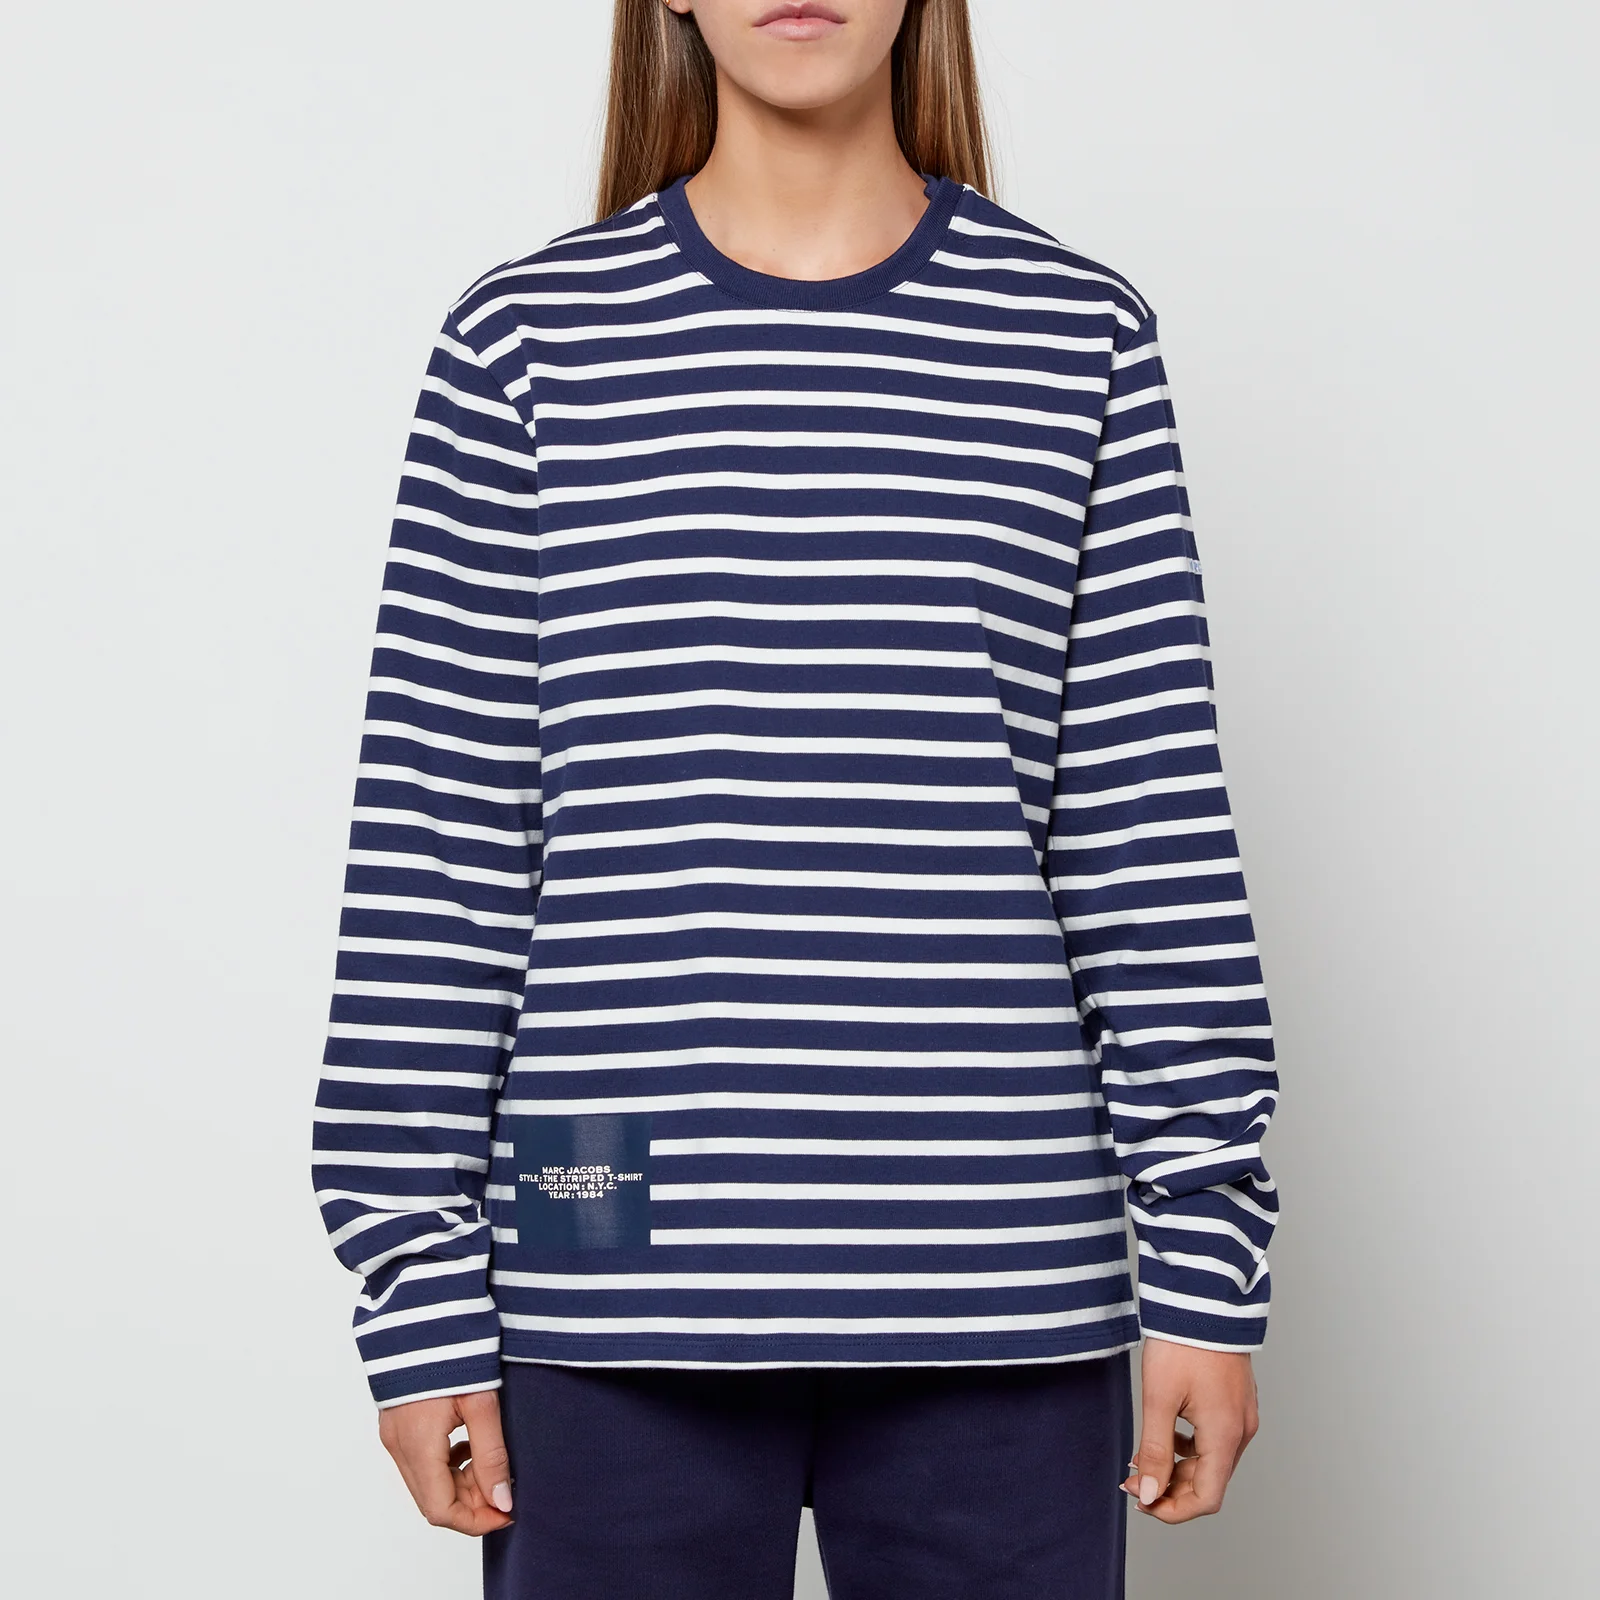 Marc Jacobs Women's The Striped T-Shirt - Blue Navy Multi Image 1